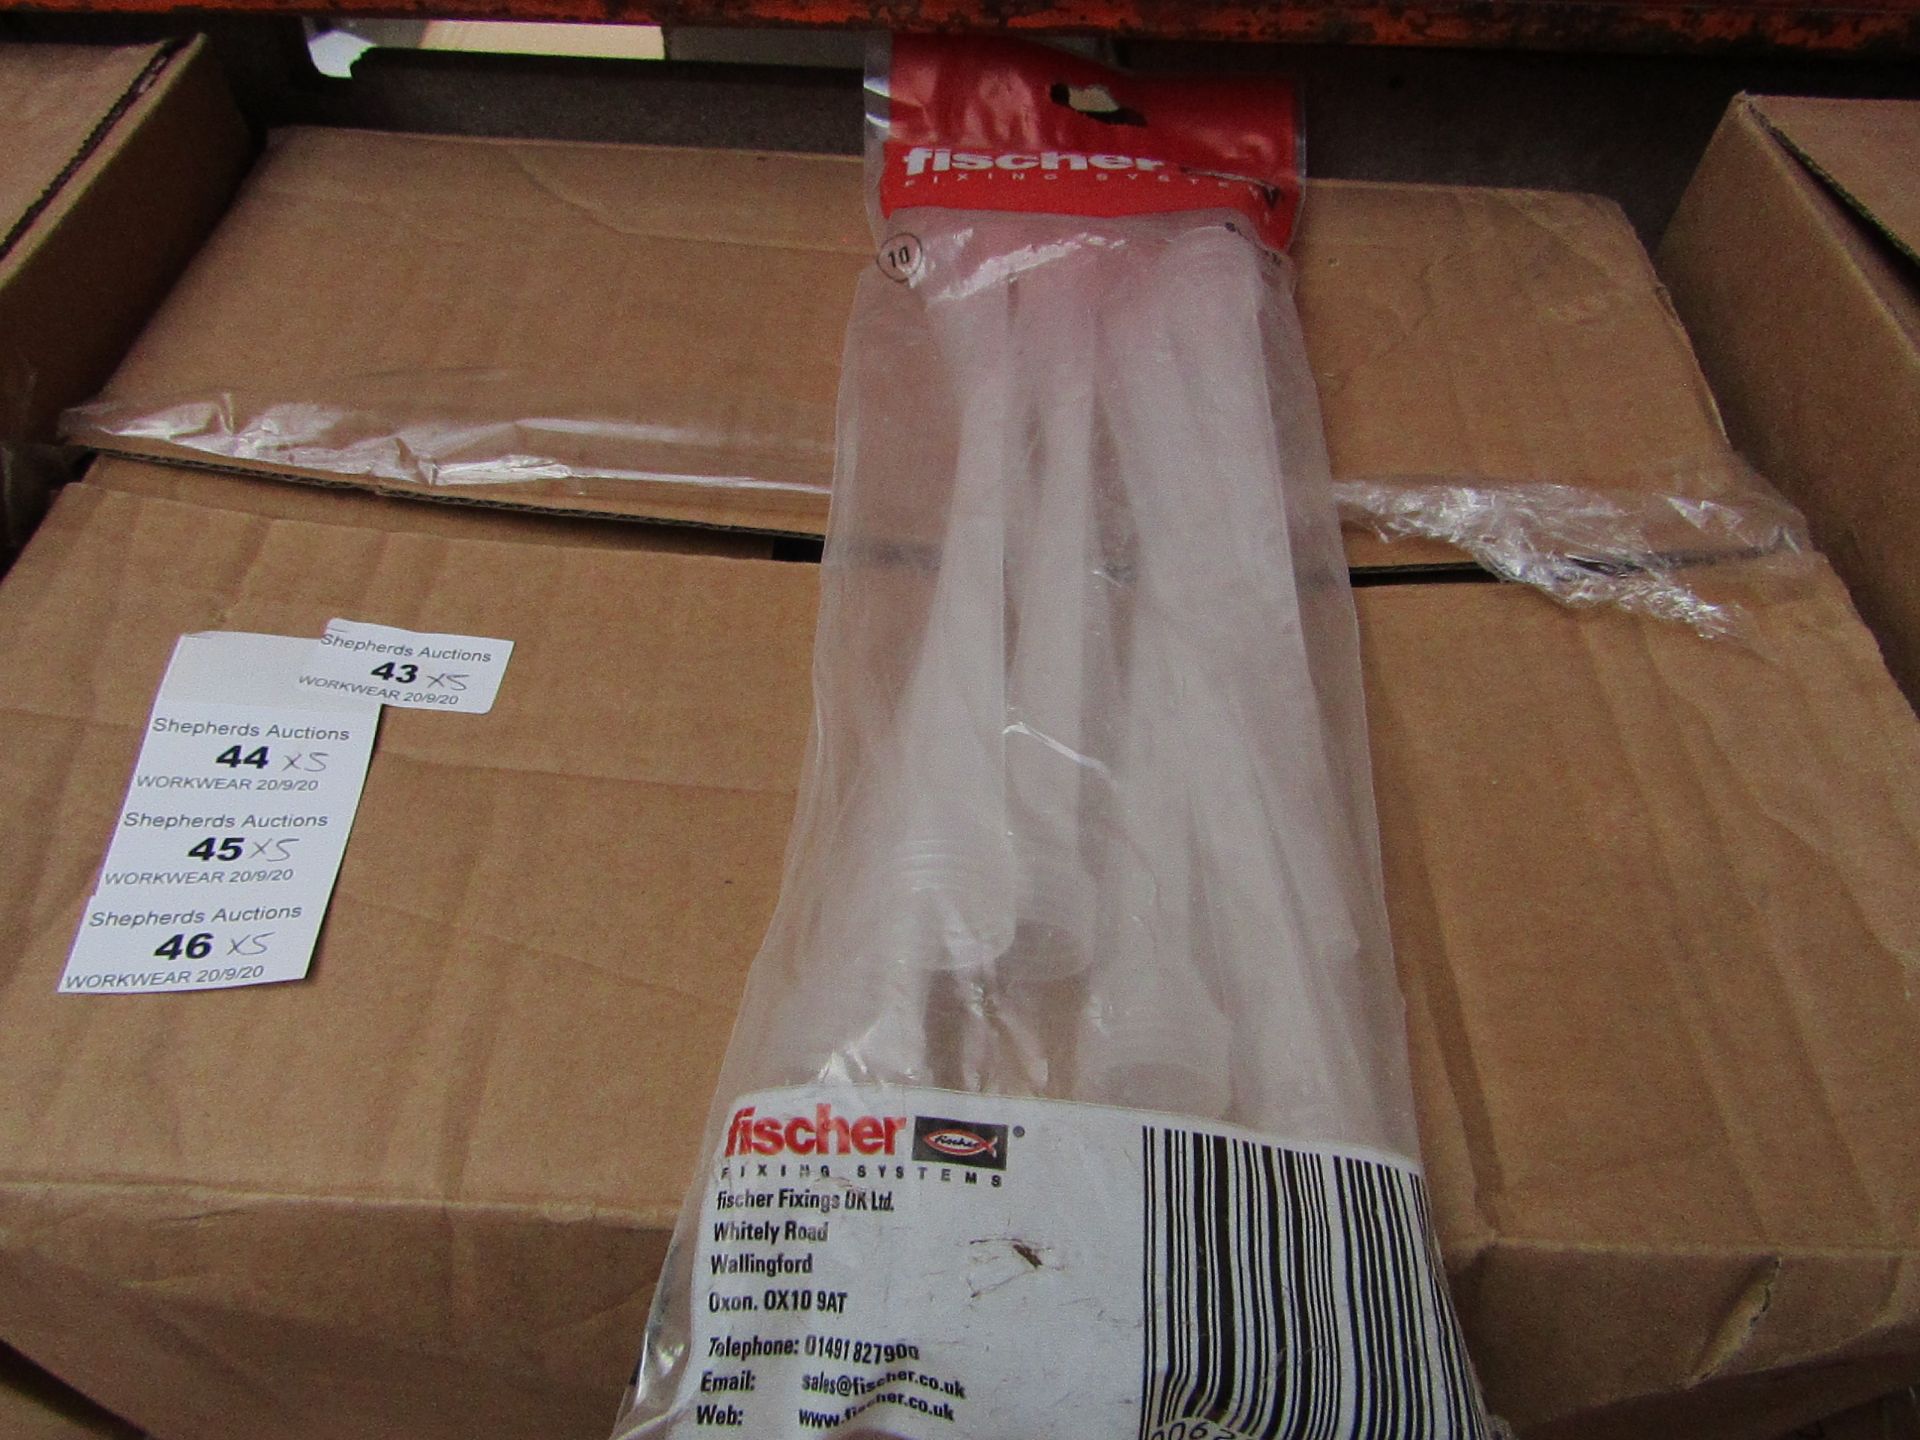 5x Fischer - Static Mixers - (Packs of 10) - New & Packaged.